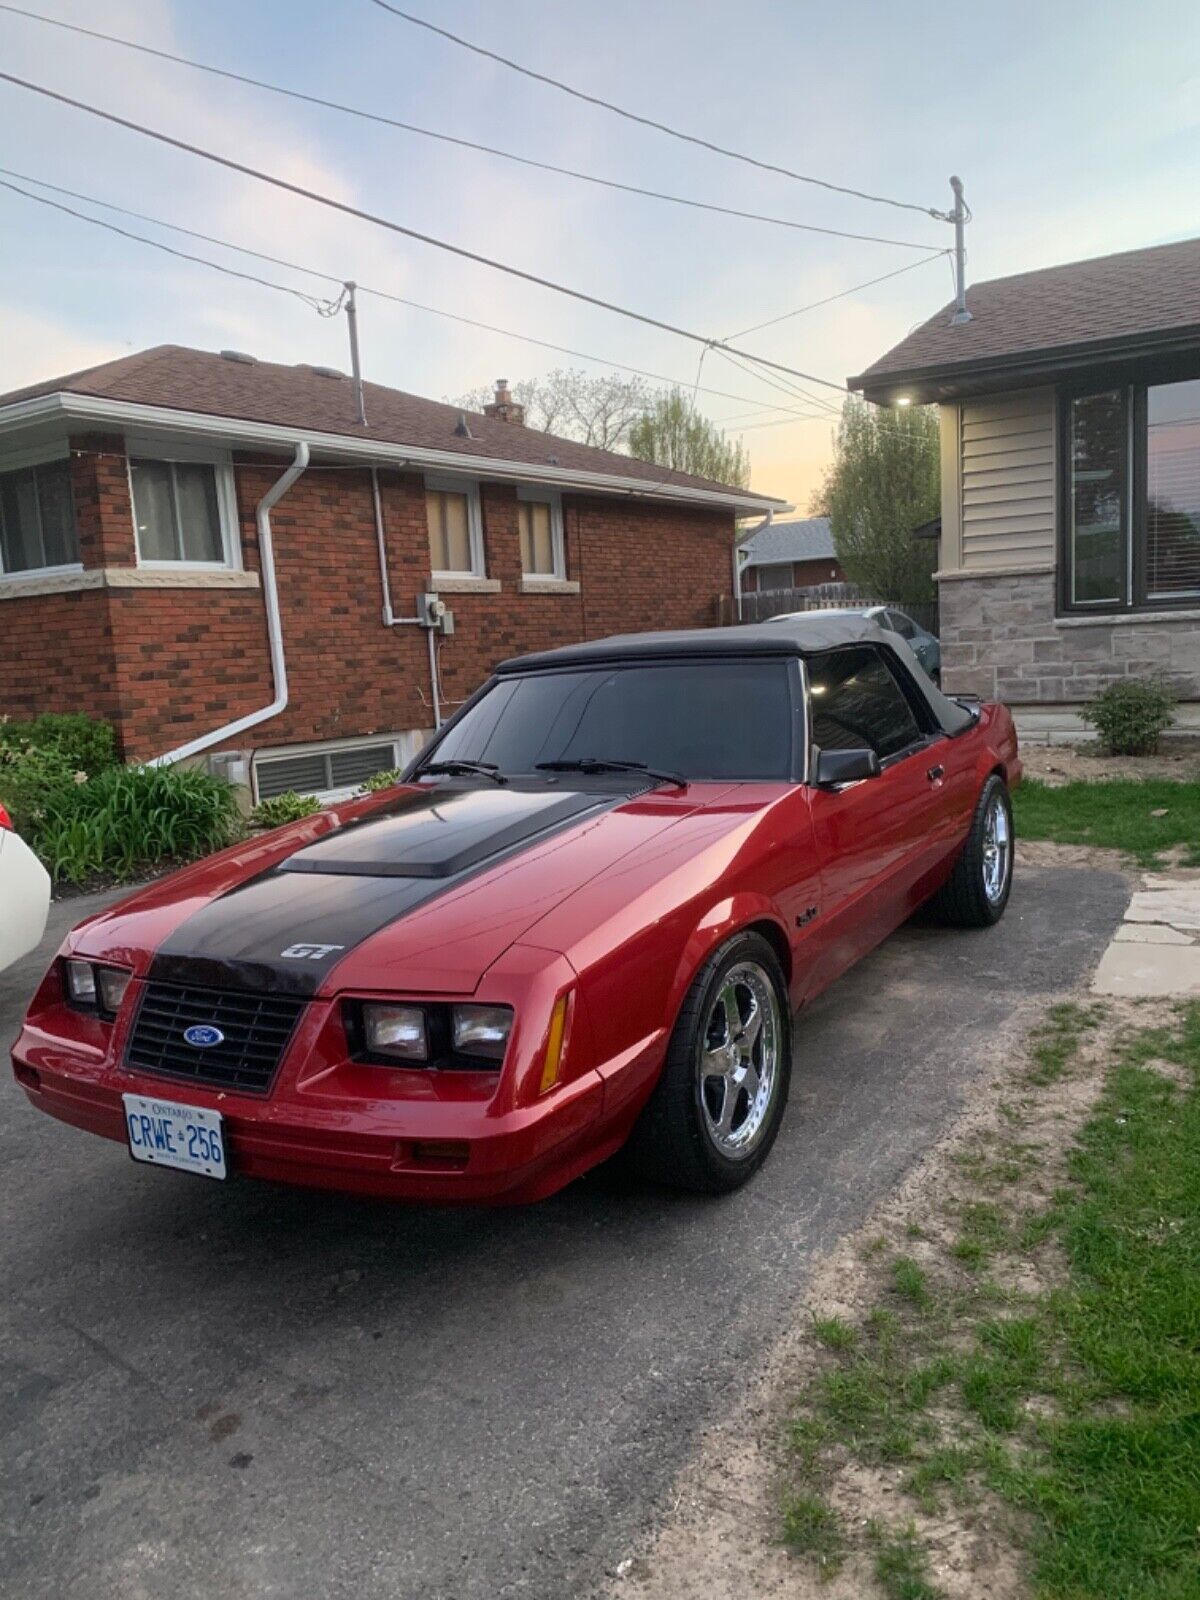 Ford Mustang Cabriolet 1983 à vendre